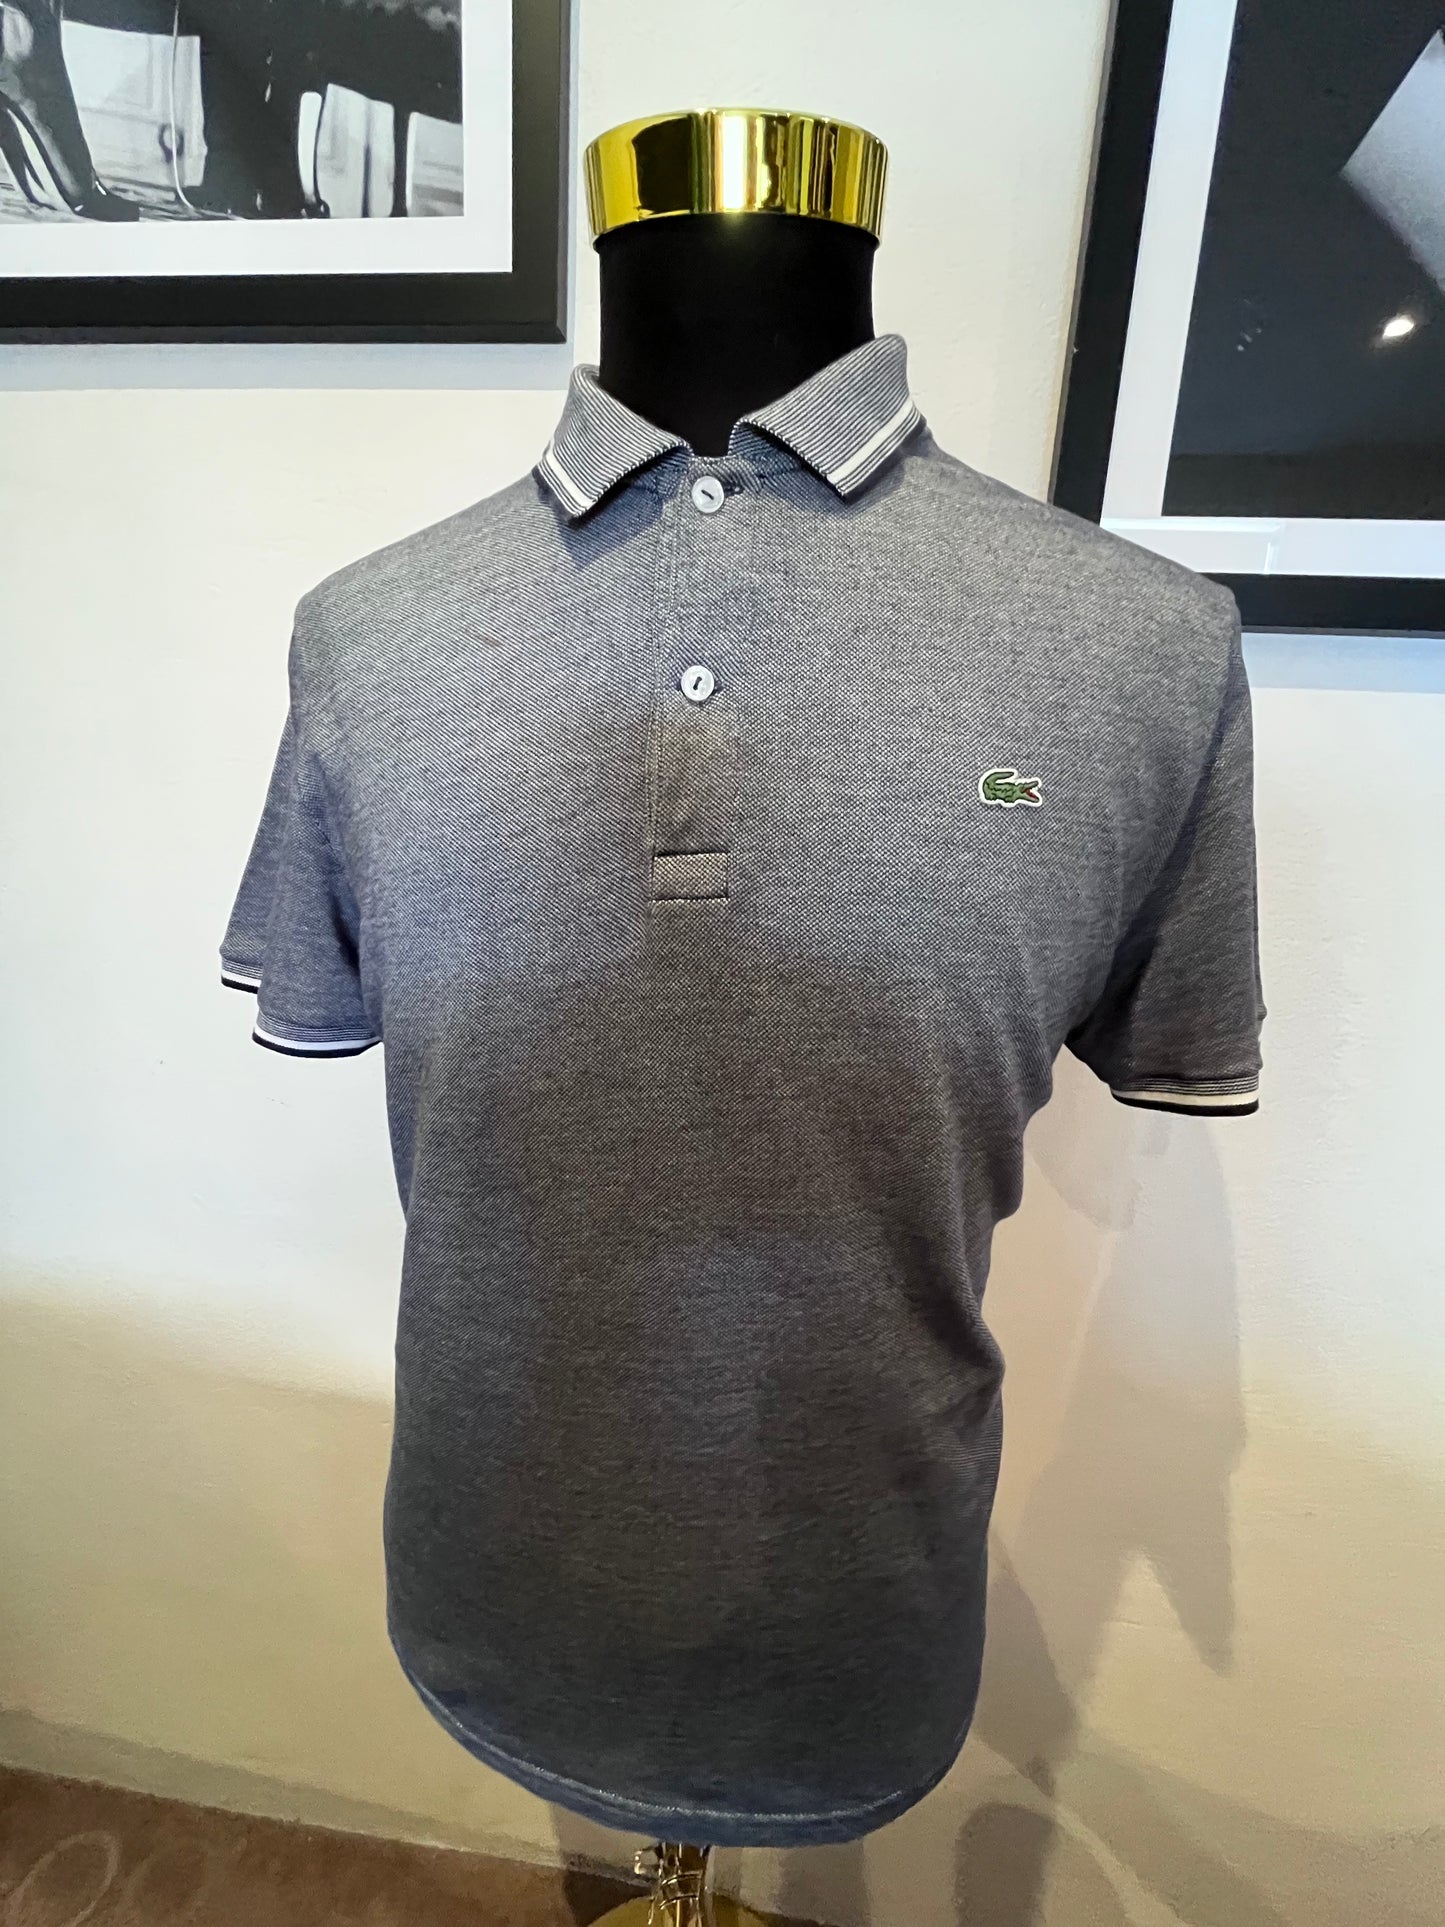 Lacoste 100% Grey Polo Shirt Size US Large Regular Fit Made in France Fits like a medium